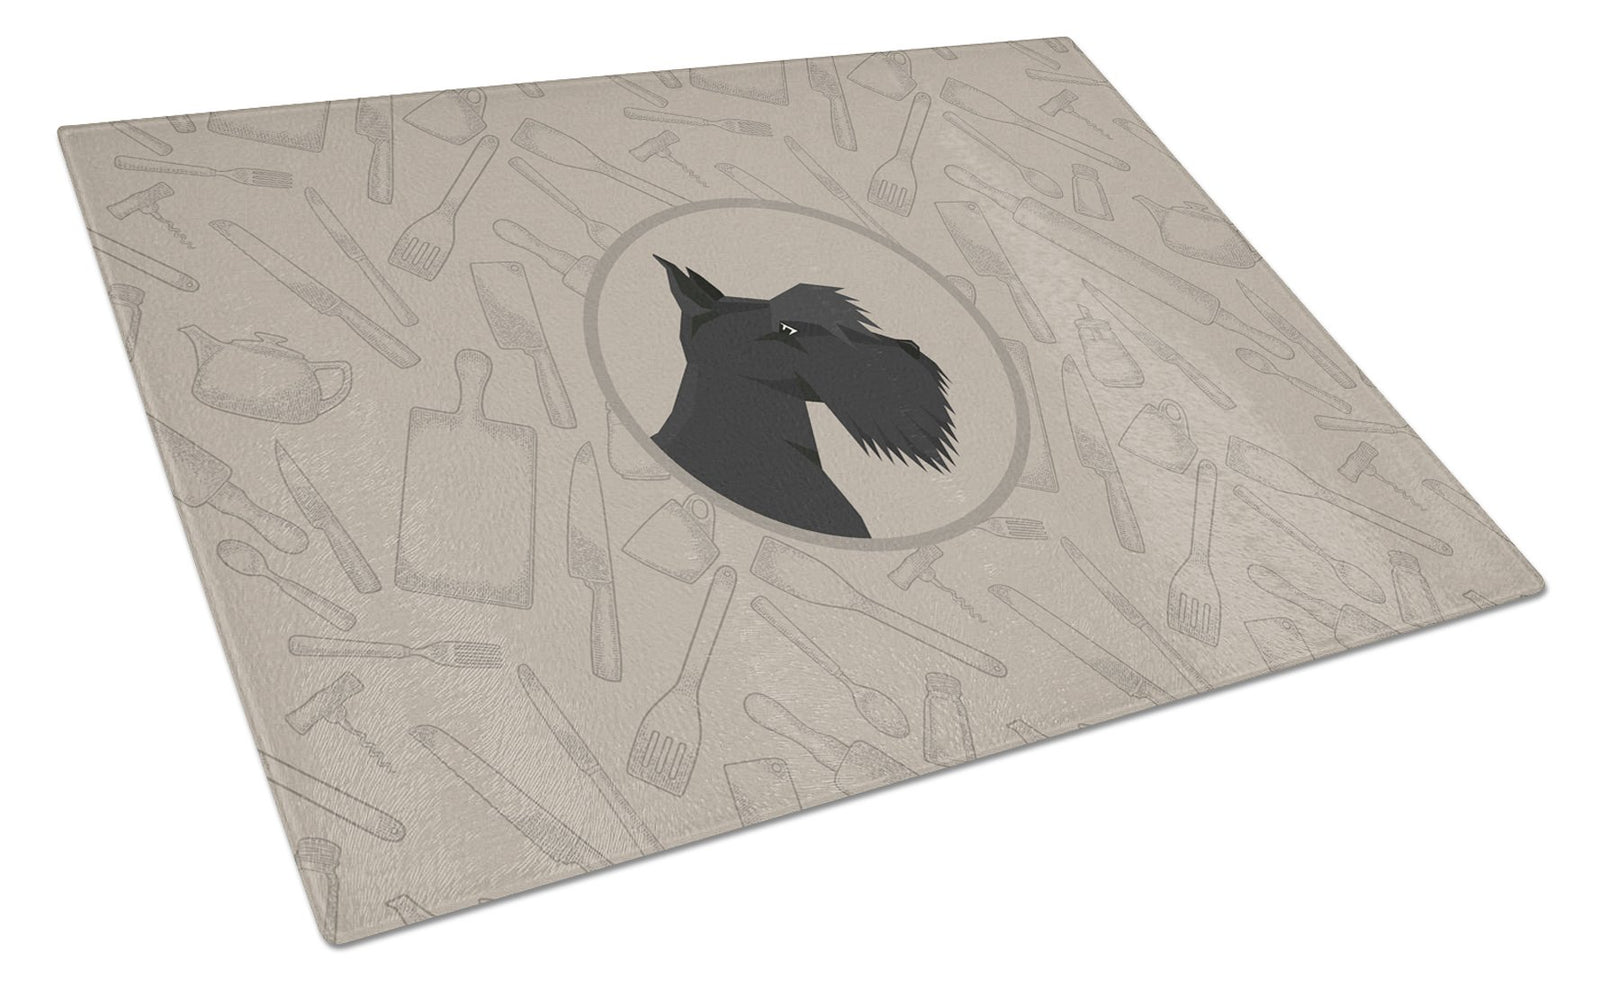 Scottish Terrier In the Kitchen Glass Cutting Board Large CK2207LCB by Caroline's Treasures